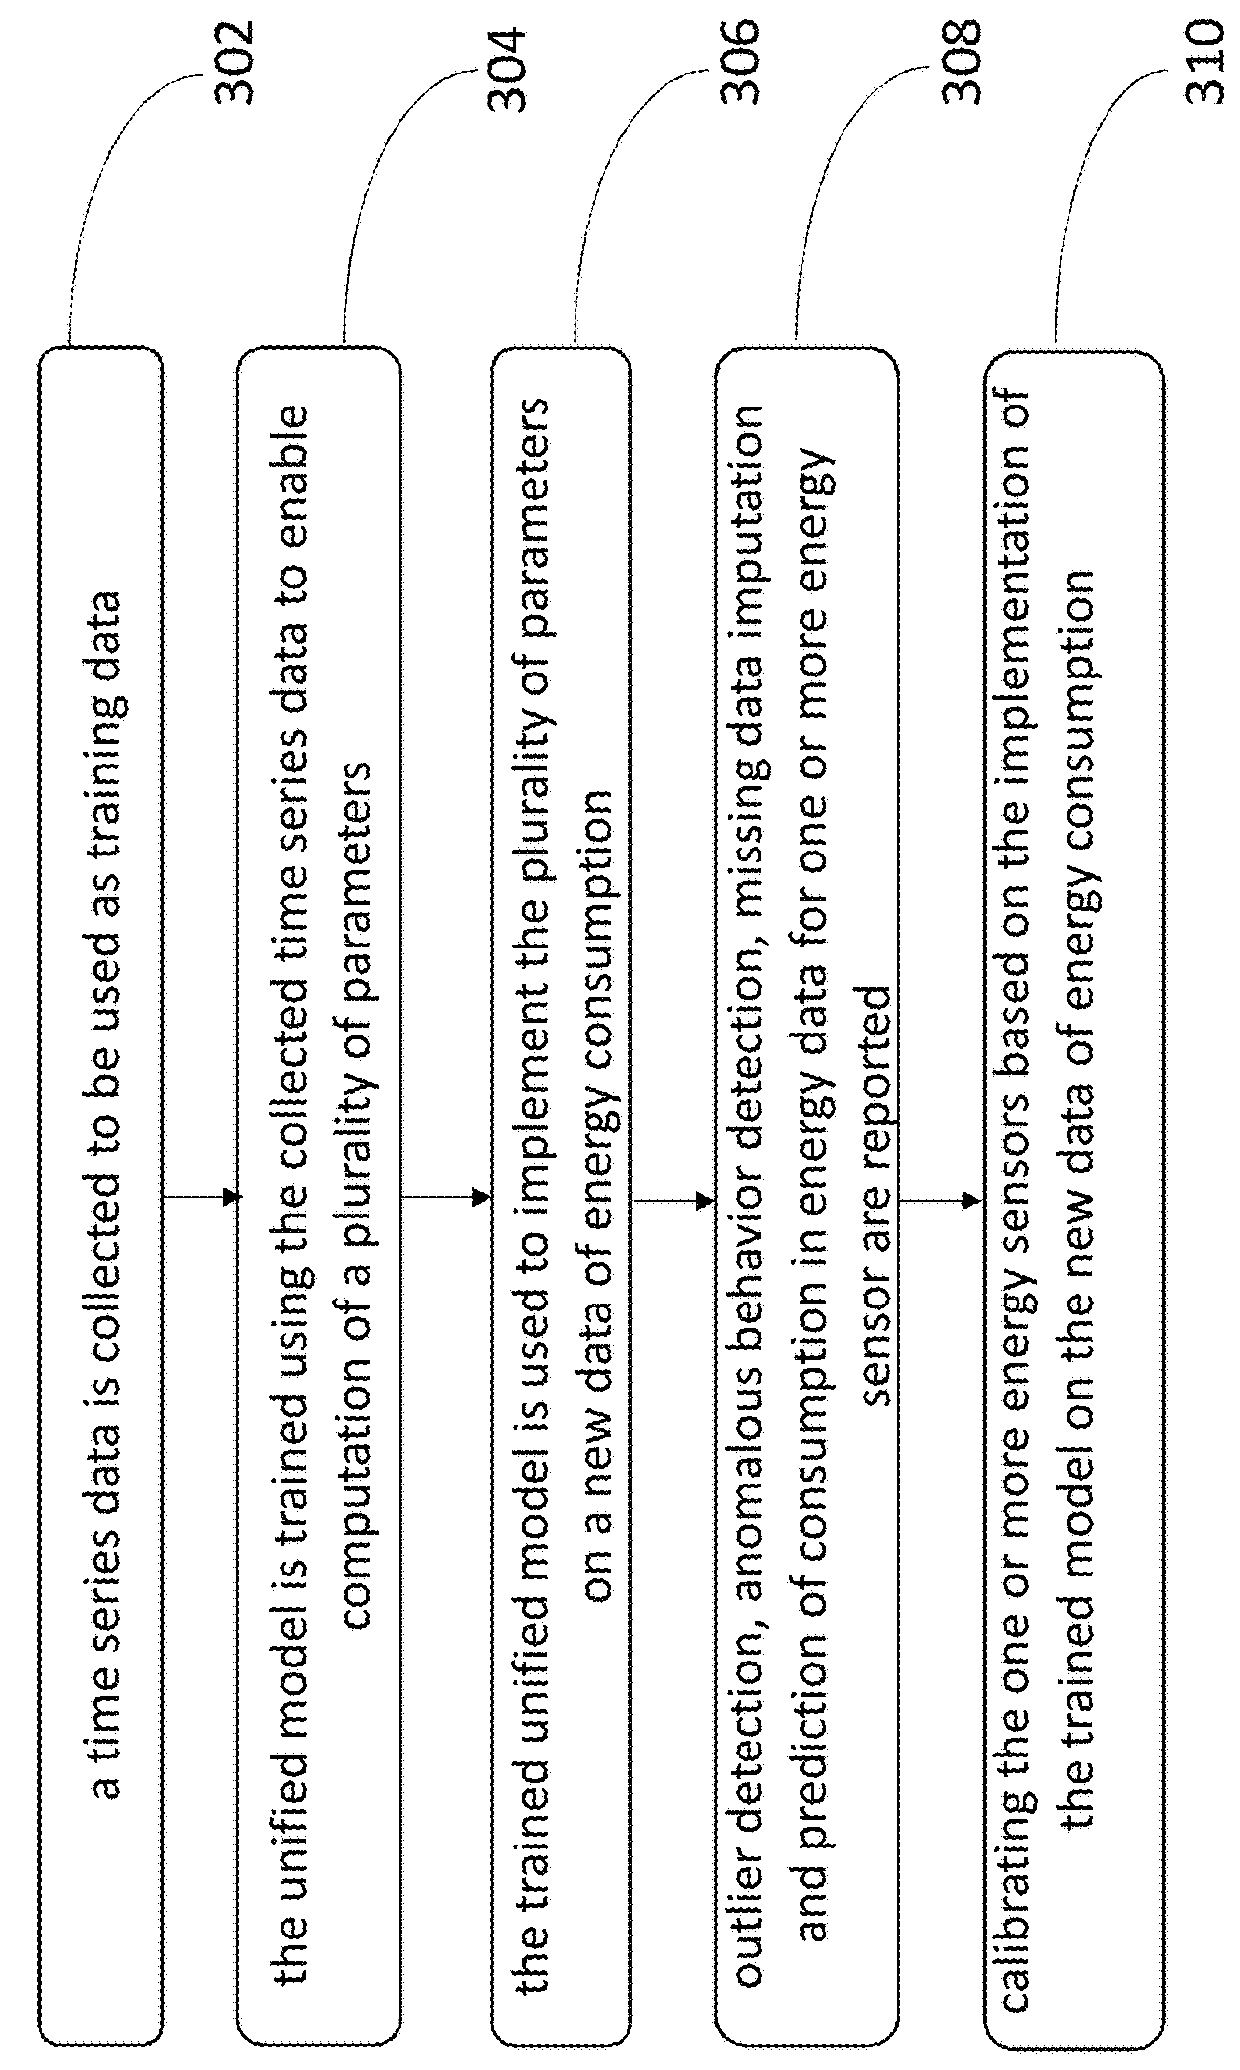 Method and system for anomaly detecttion, missing data imputation and consumption prediction in energy data